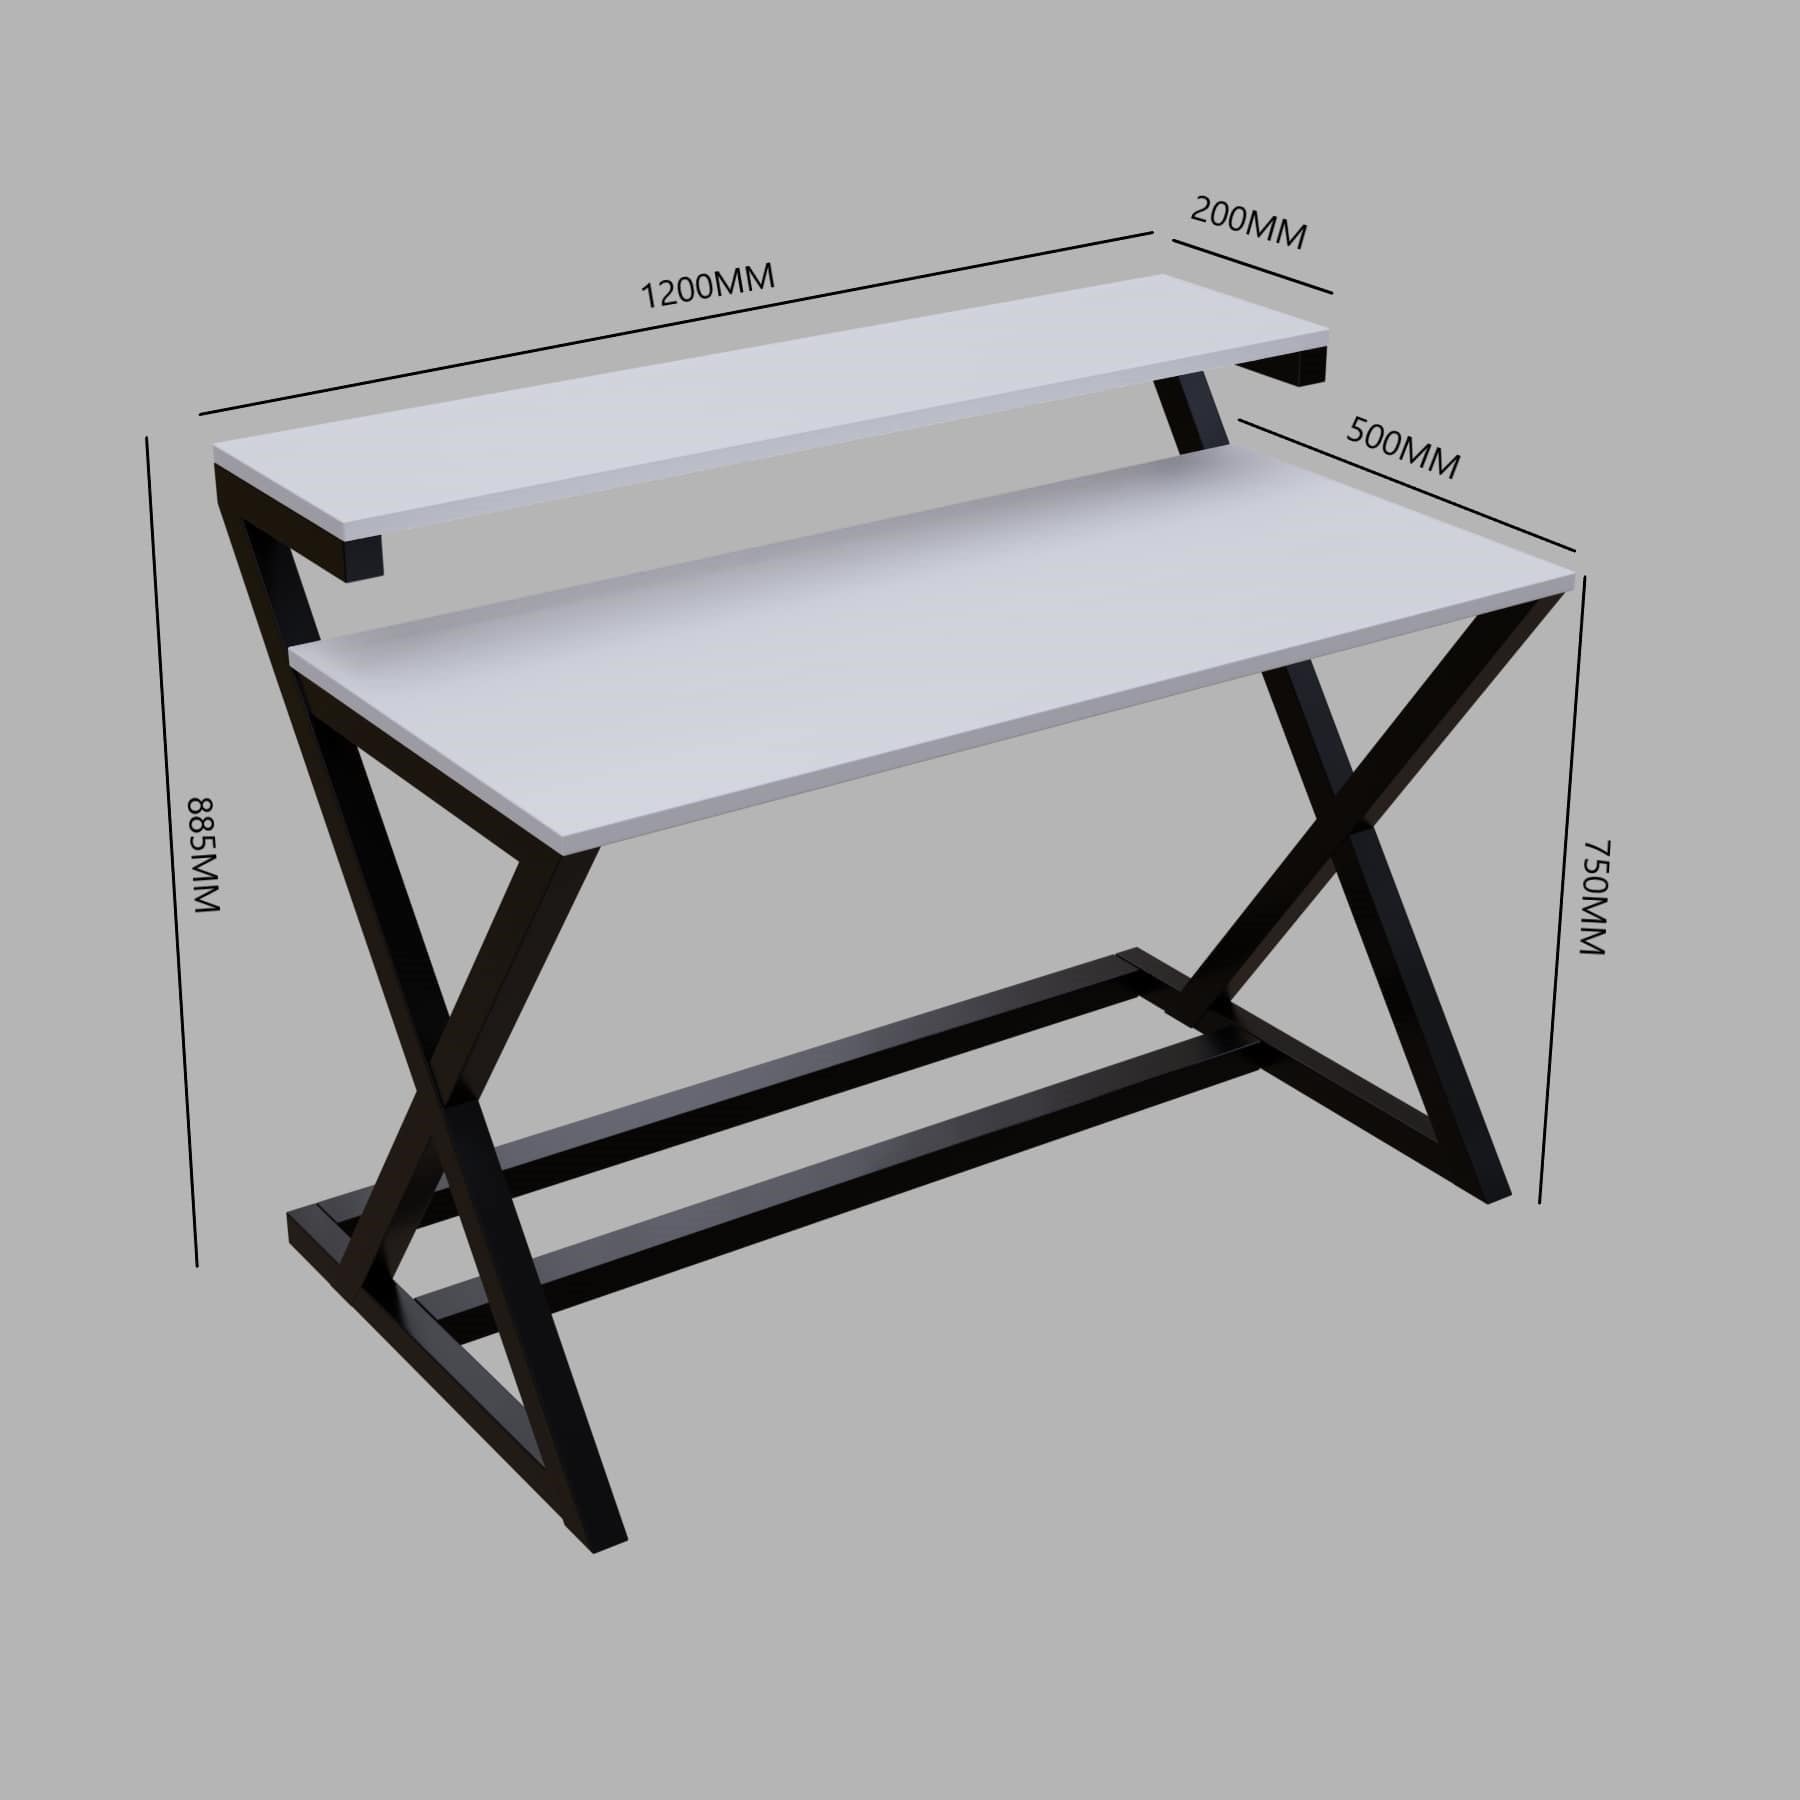 Austin Study Table in White Color with Upper Shelve